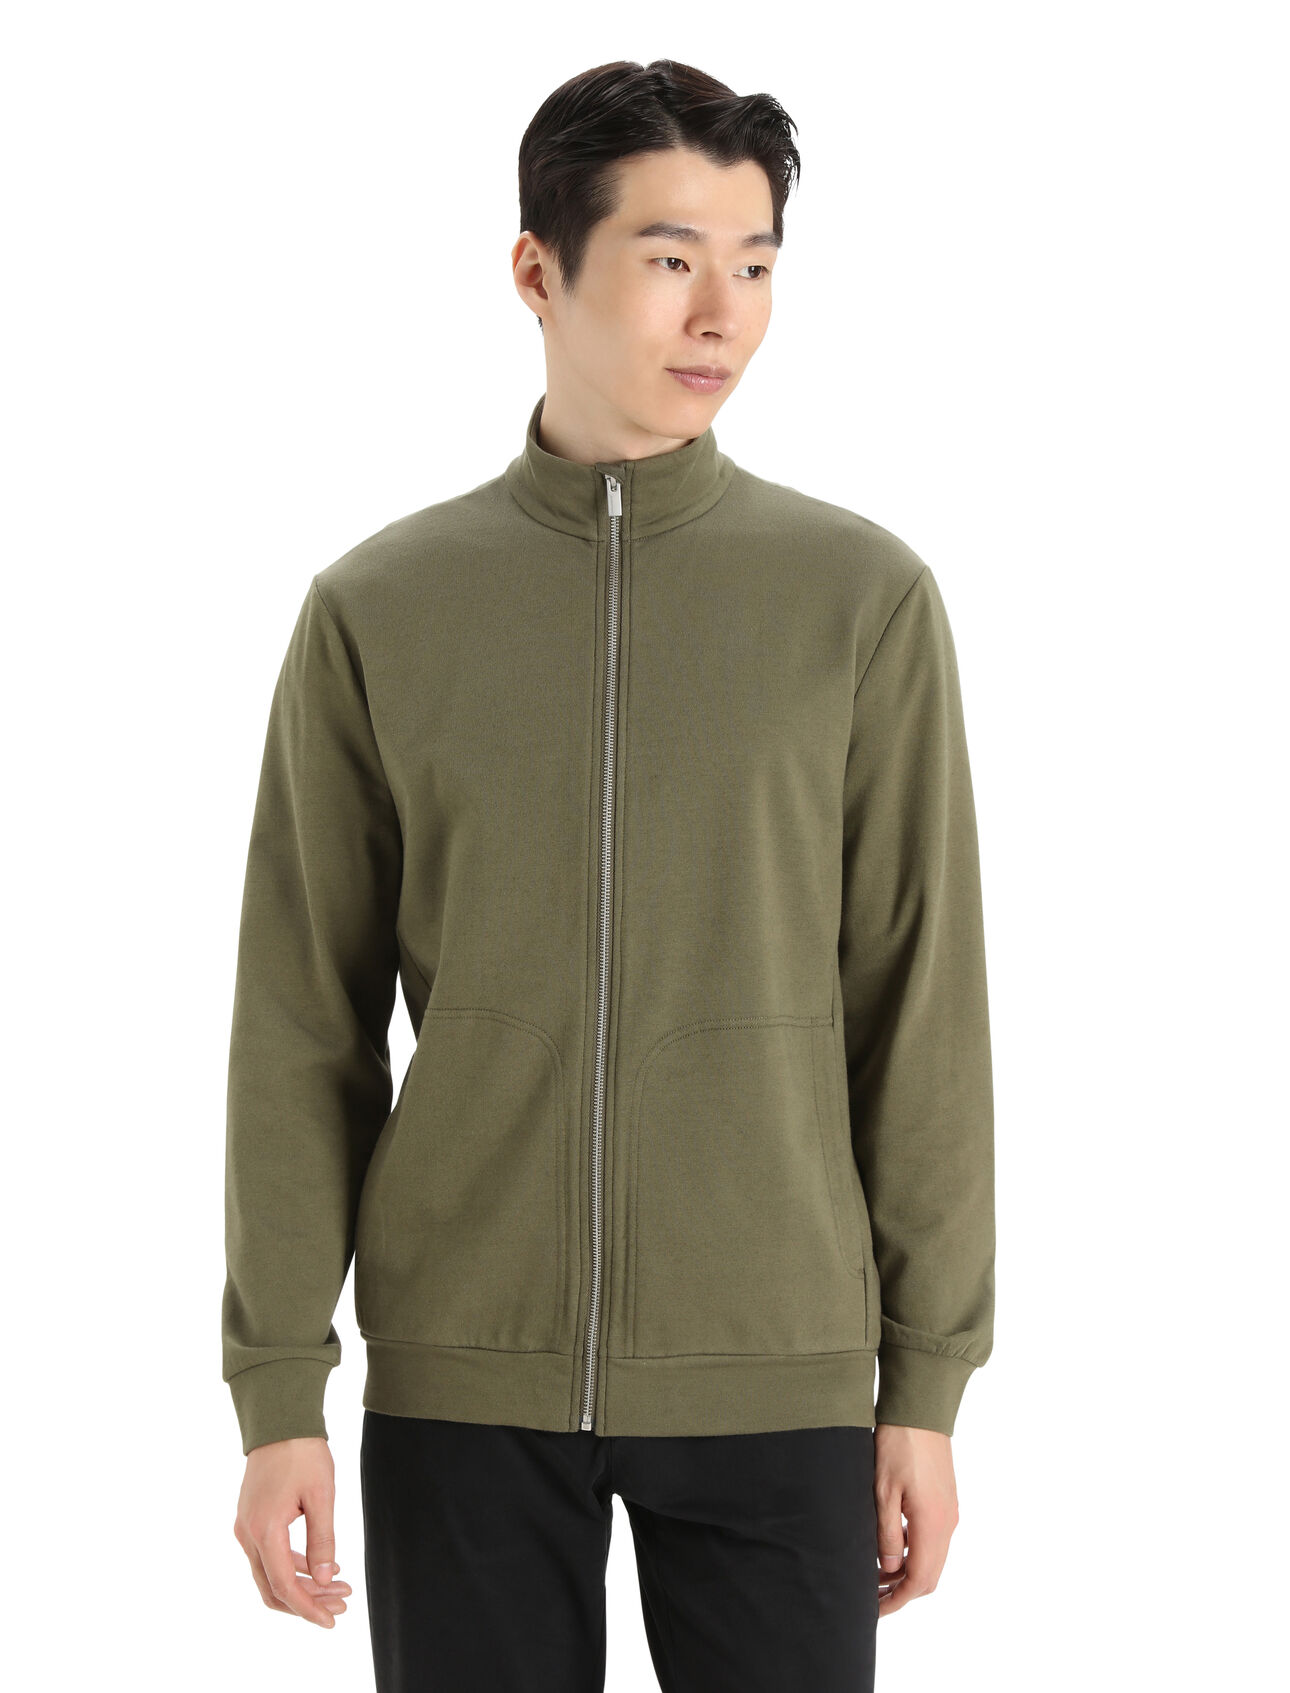 Mens Merino Central II Long Sleeve Zip Sweatshirt A versatile, everyday sweatshirt that goes anywhere in comfort, the Central II Long Sleeve Zip features a sustainable blend of natural merino wool and soft organic cotton.